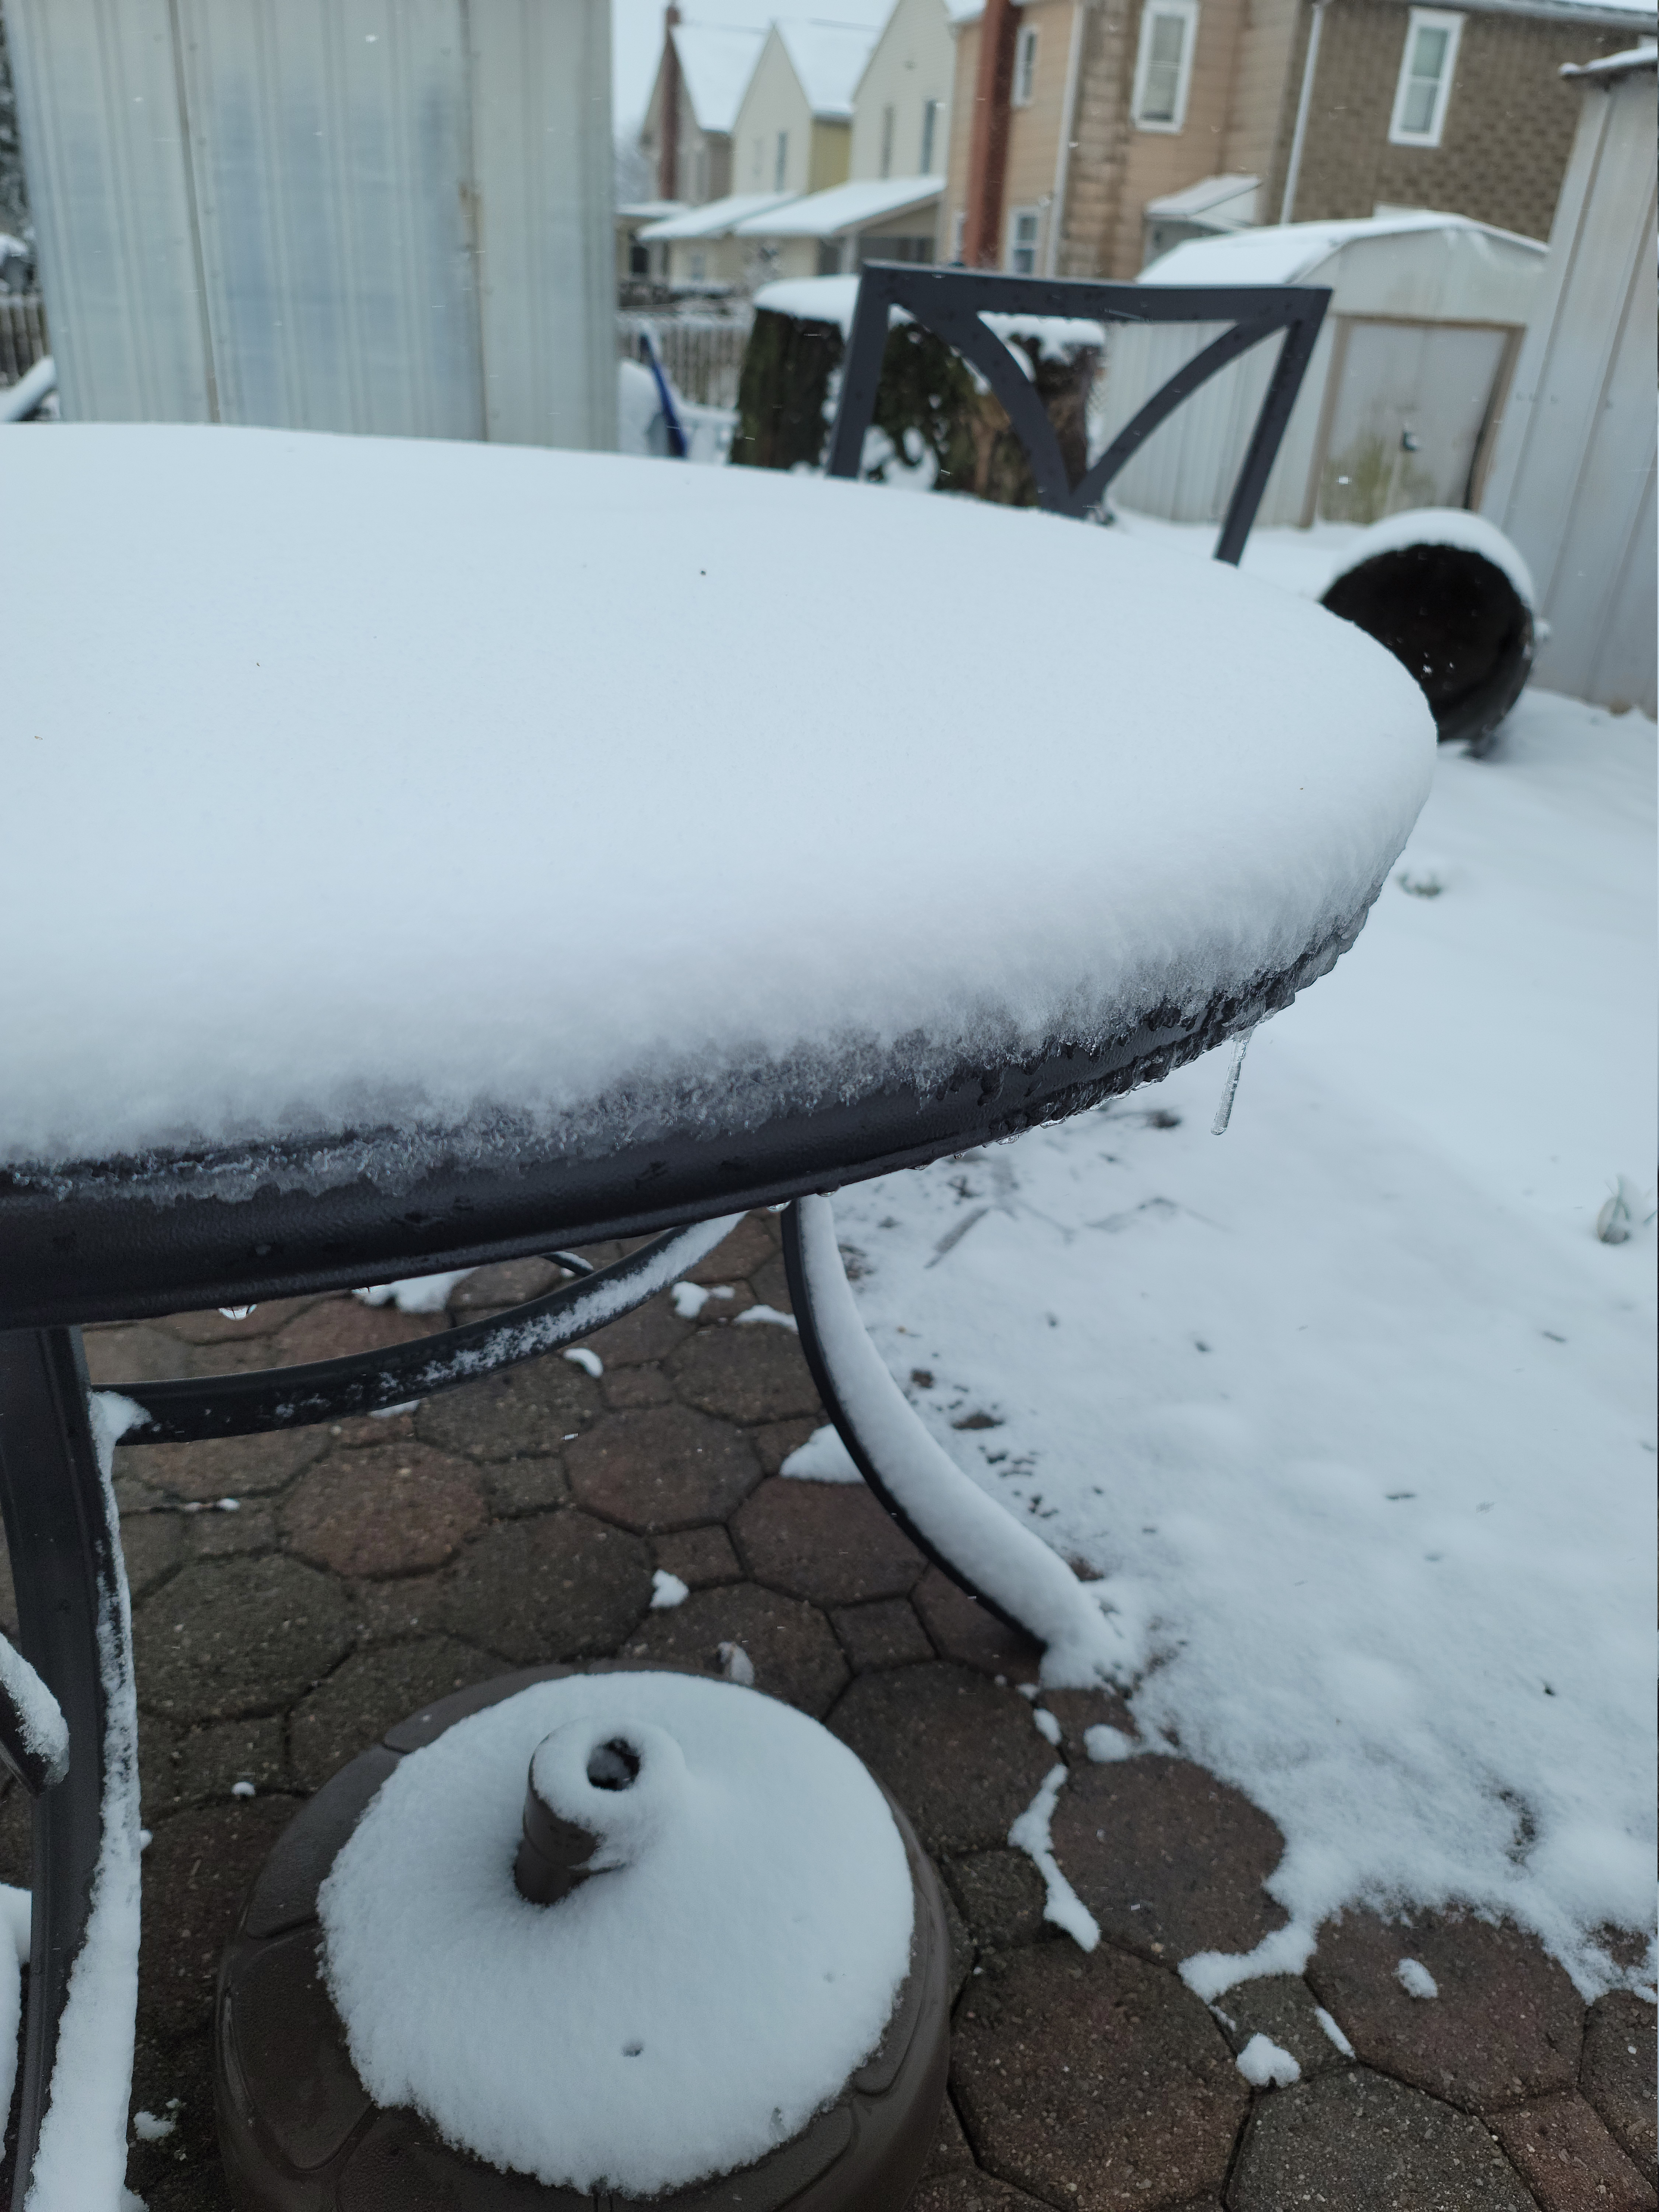 This is a picture of about three inches of fresh snow accumulated on a patio table. There's also varying amounts of snow on the ground and other surfaces.